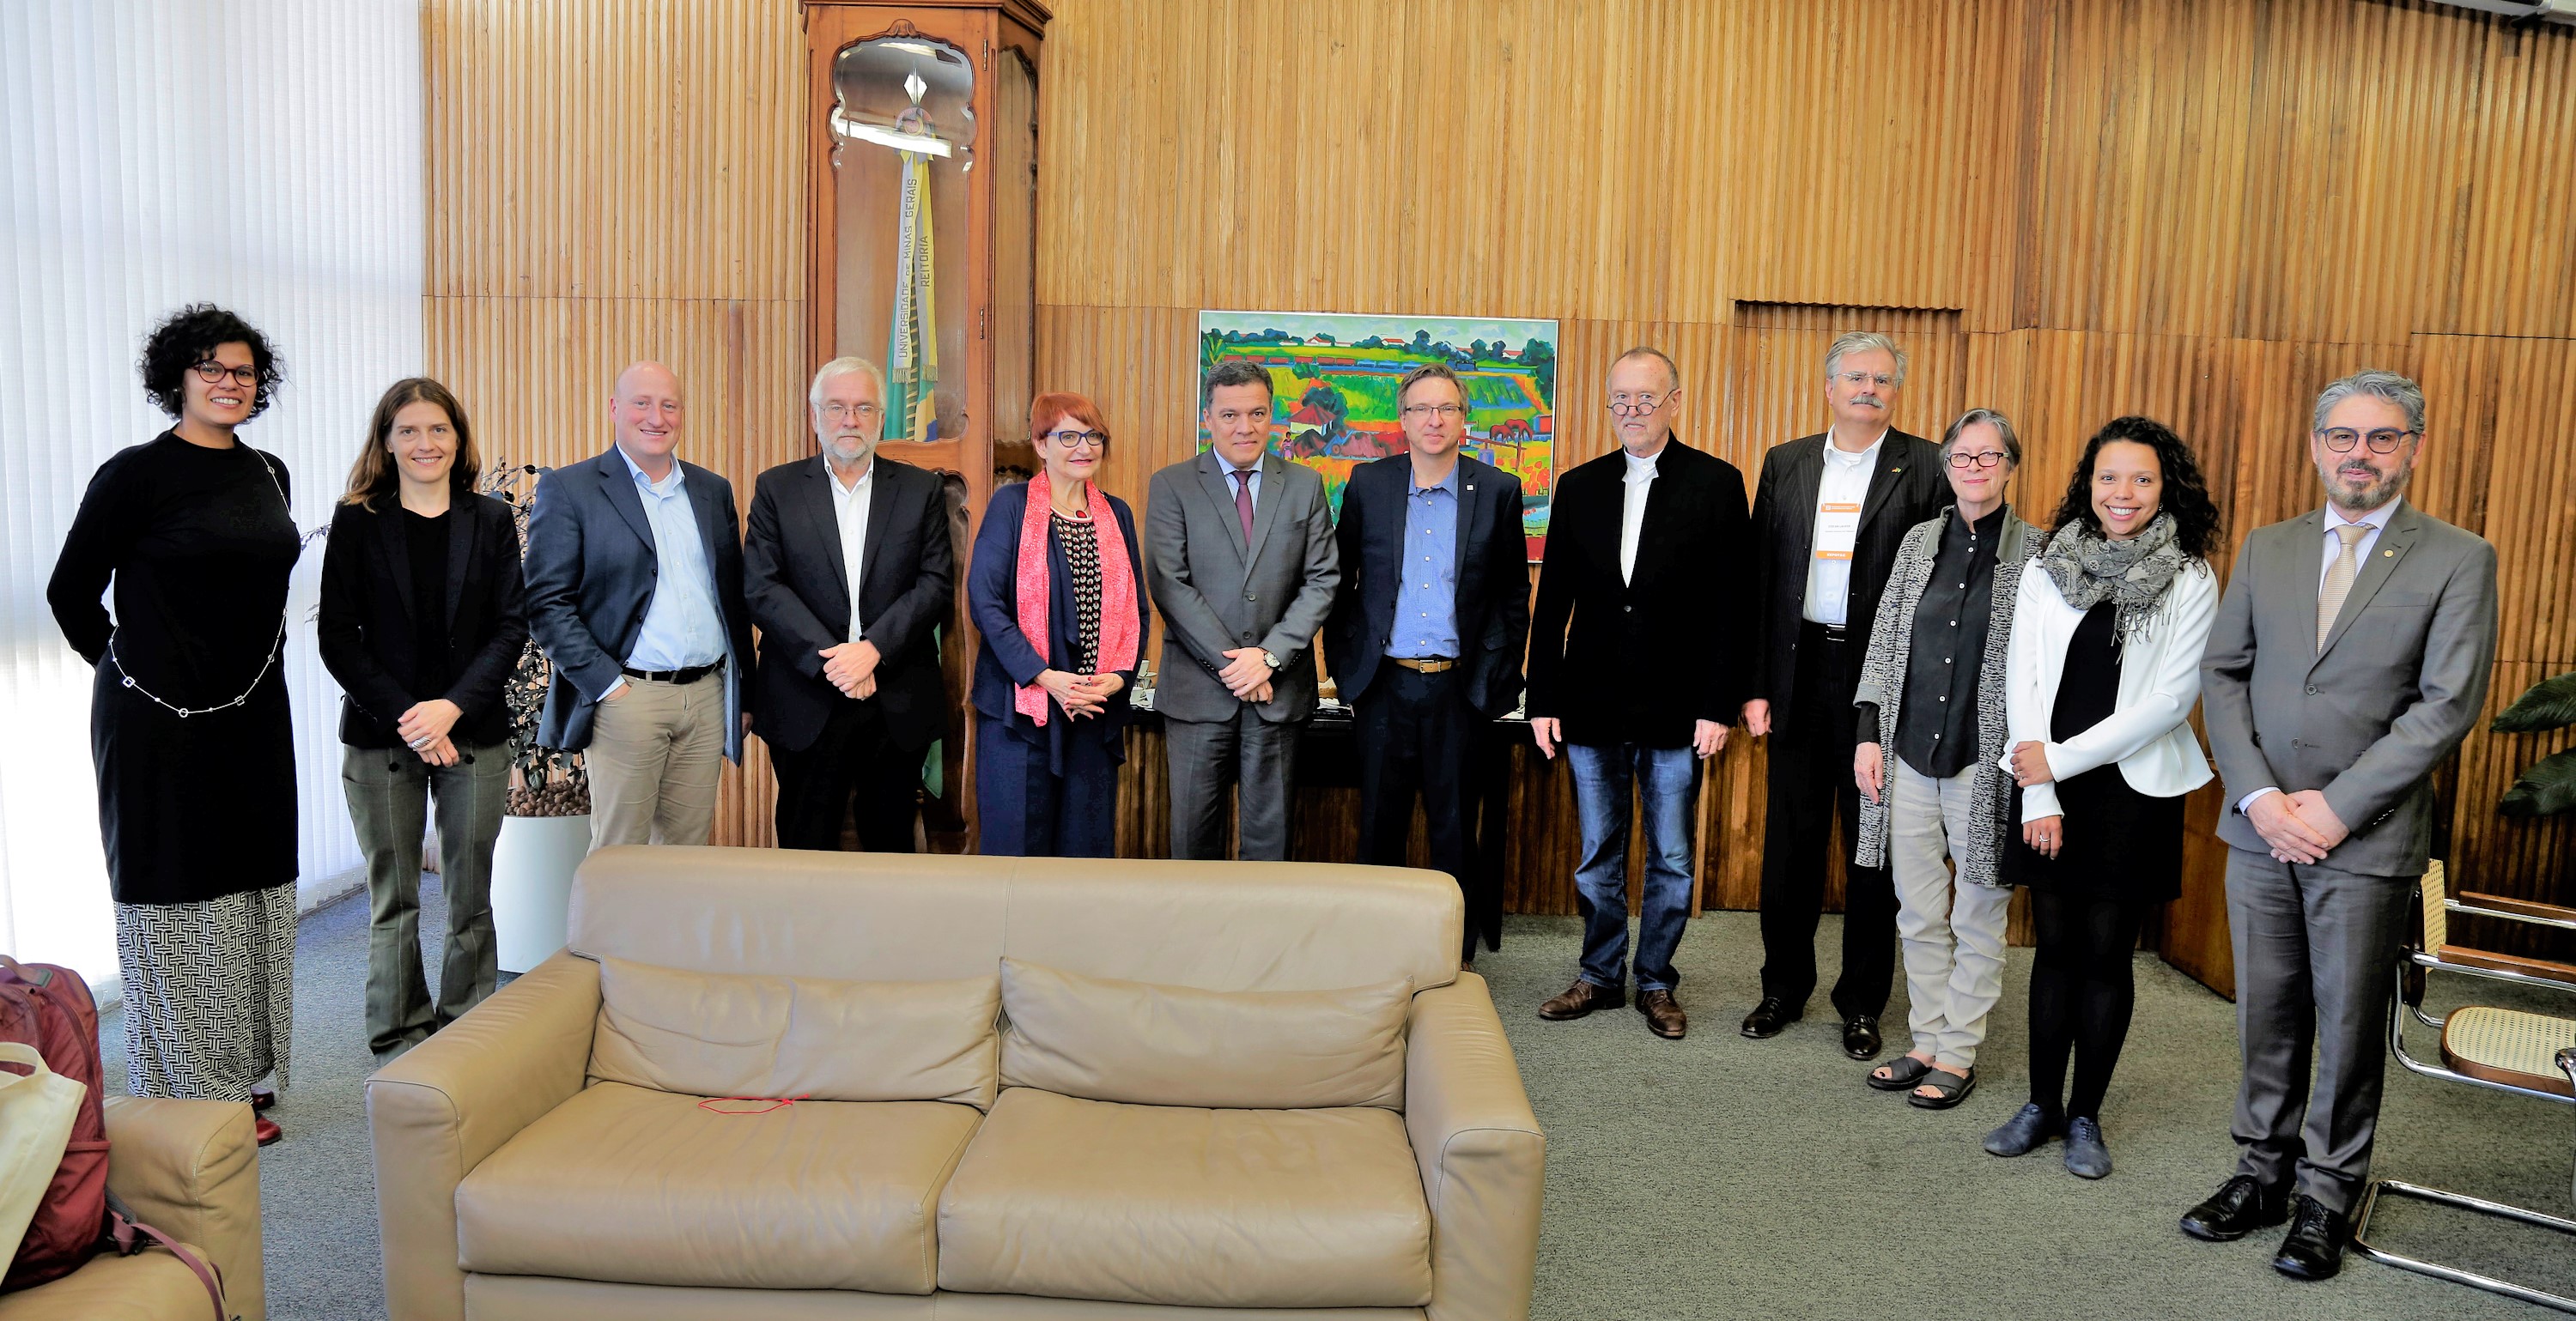 Visit of the German delegation with the Rector of the UFMG, Jaime Ramírez (6th person from left to right)